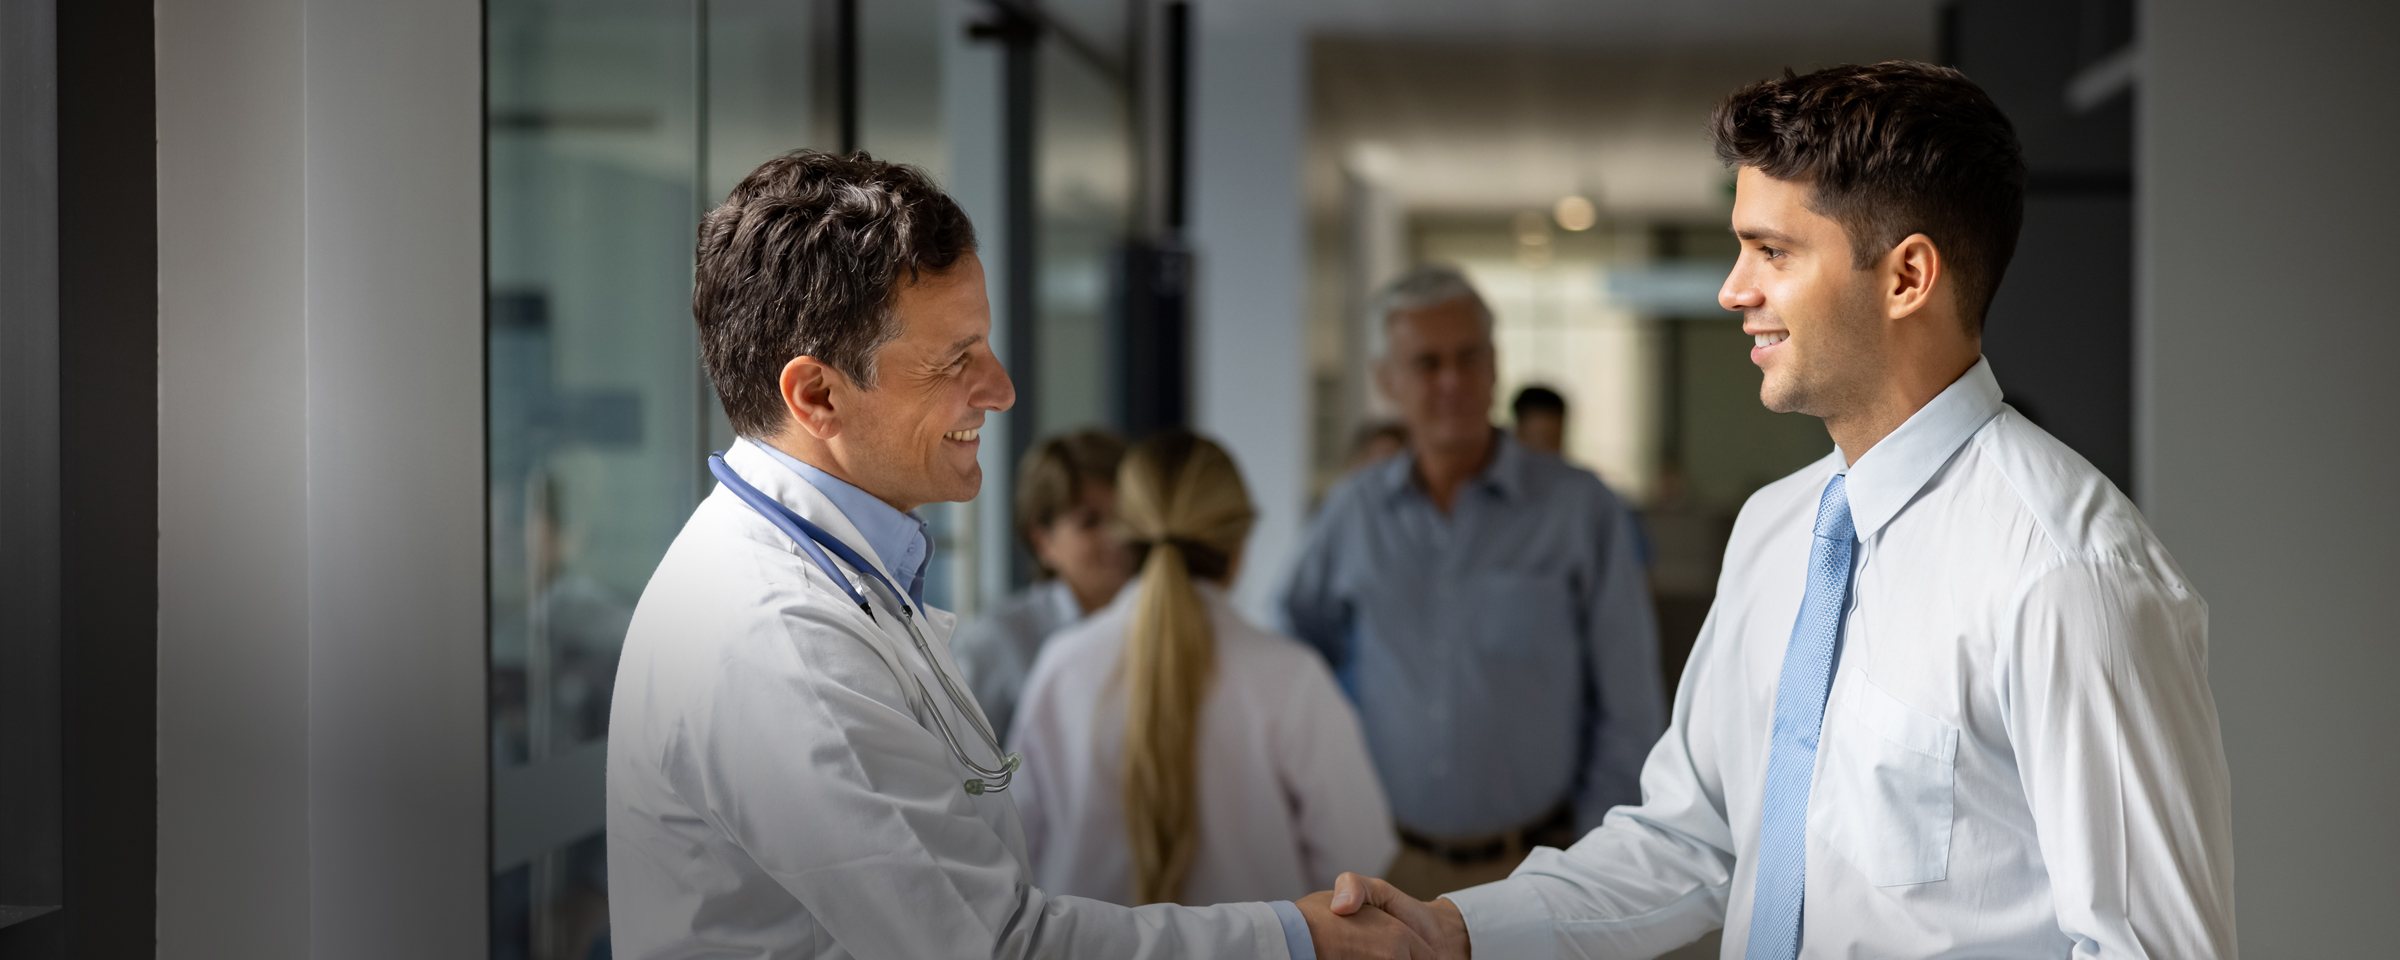 Two men shaking hands in a healthcare setting